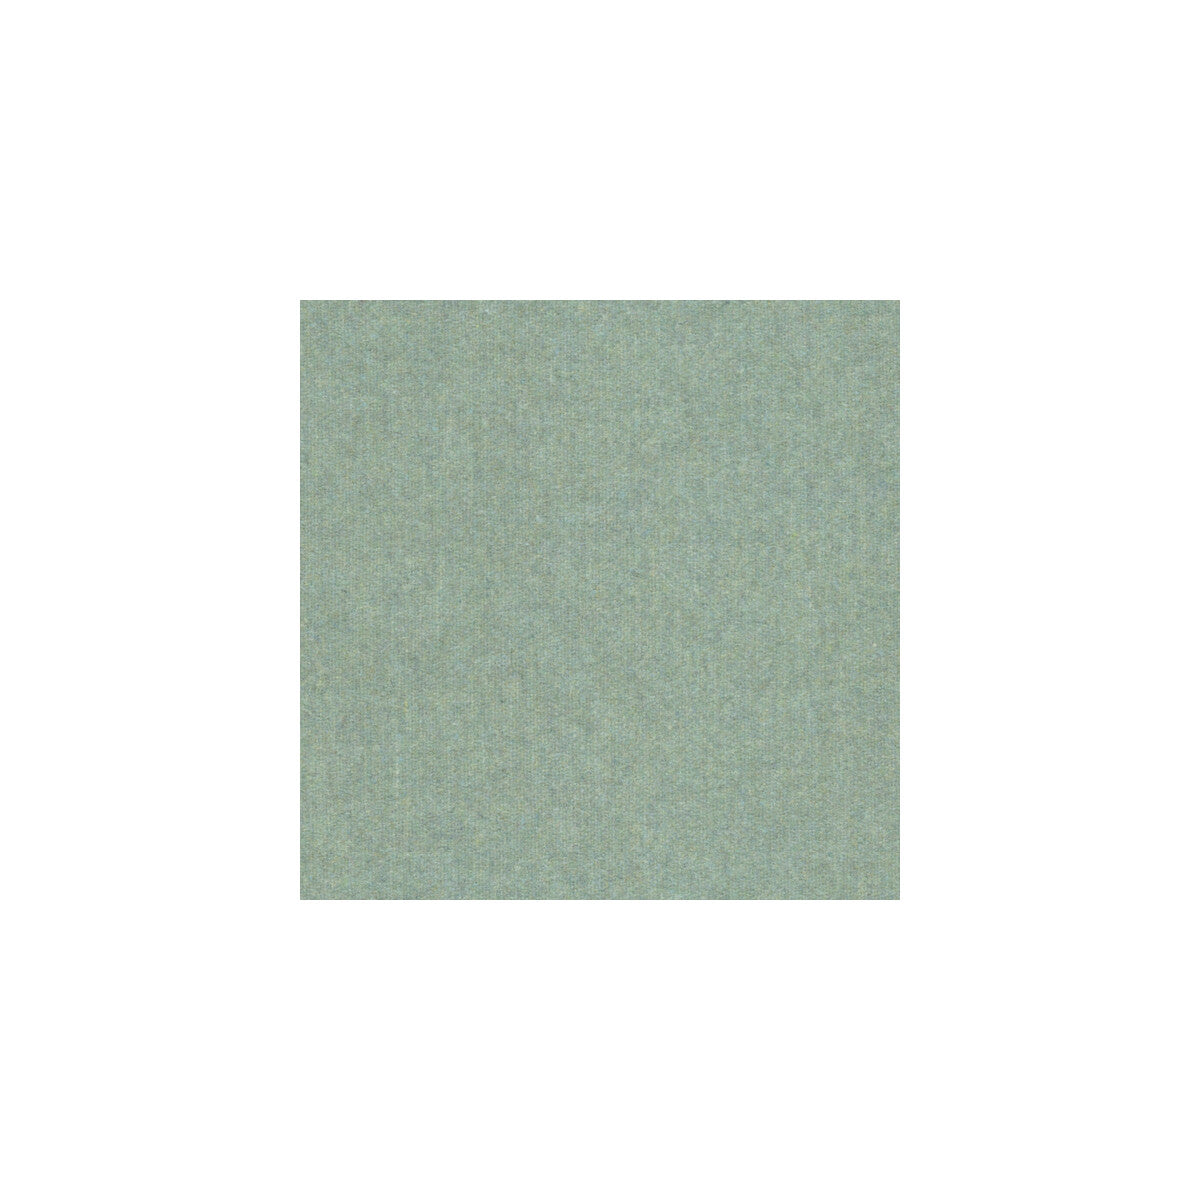 Milano Wool fabric in mineral color - pattern 29478.135.0 - by Kravet Couture